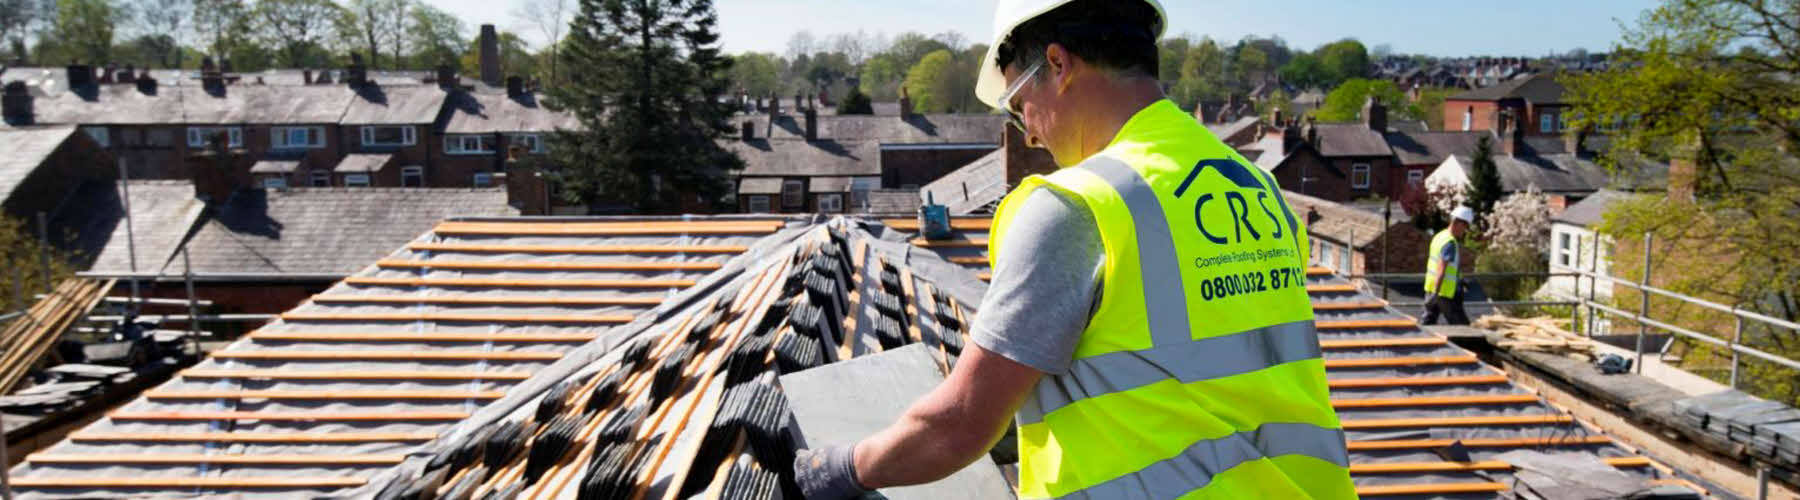 training for the roofing industry